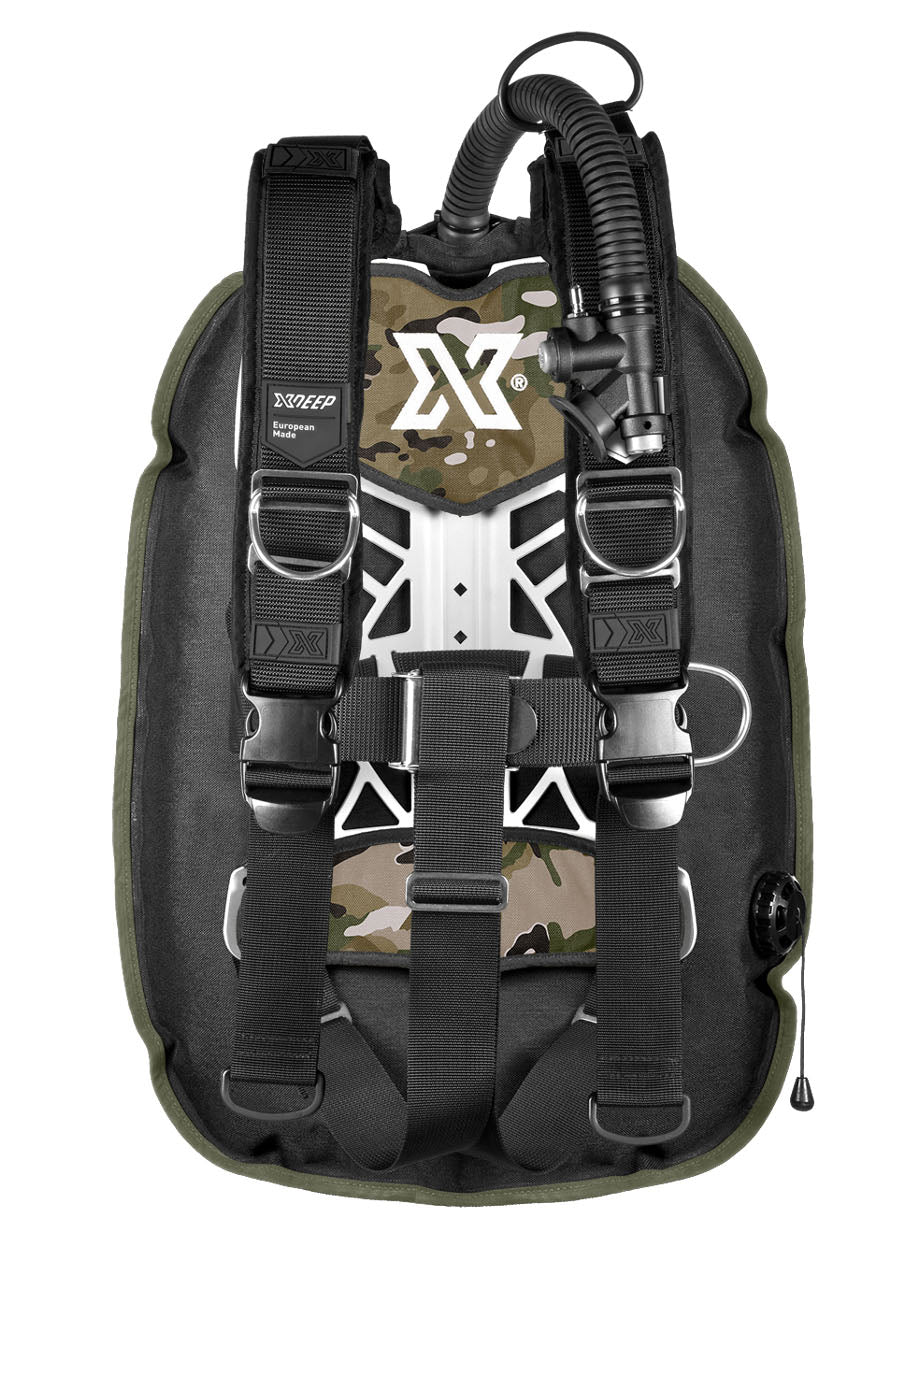 XDEEP XDEEP GHOST Full Setup with Standard or Deluxe harness Camo / Deluxe / Small - Oyster Diving